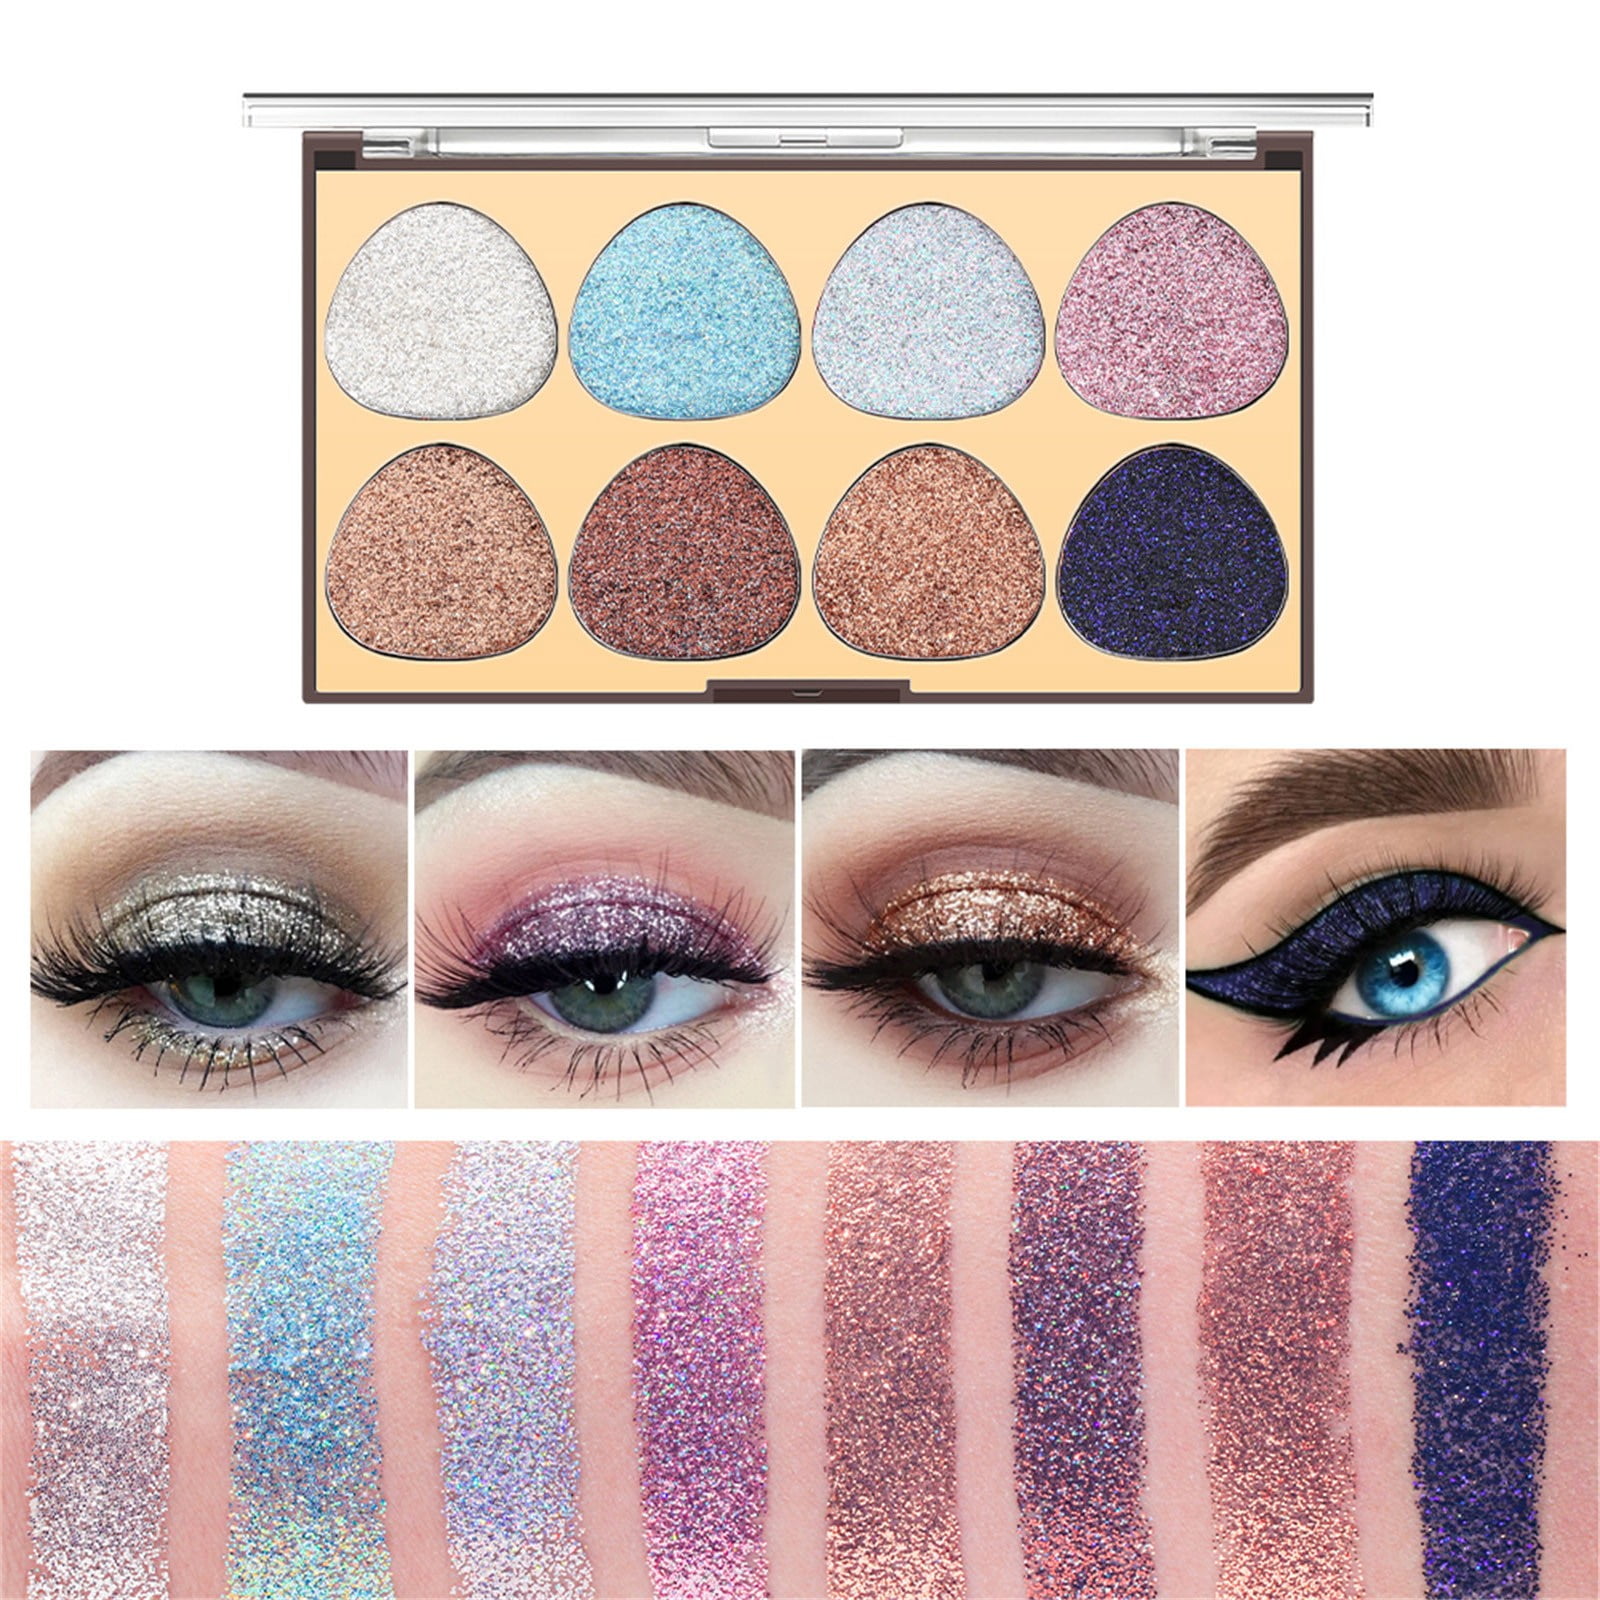 ertutuyi 8 colors glitter shimmery glittery eyeshadow makeup pallet glitter for pink silver red rose green sparkling sparkly gel pigment face - Walmart.com